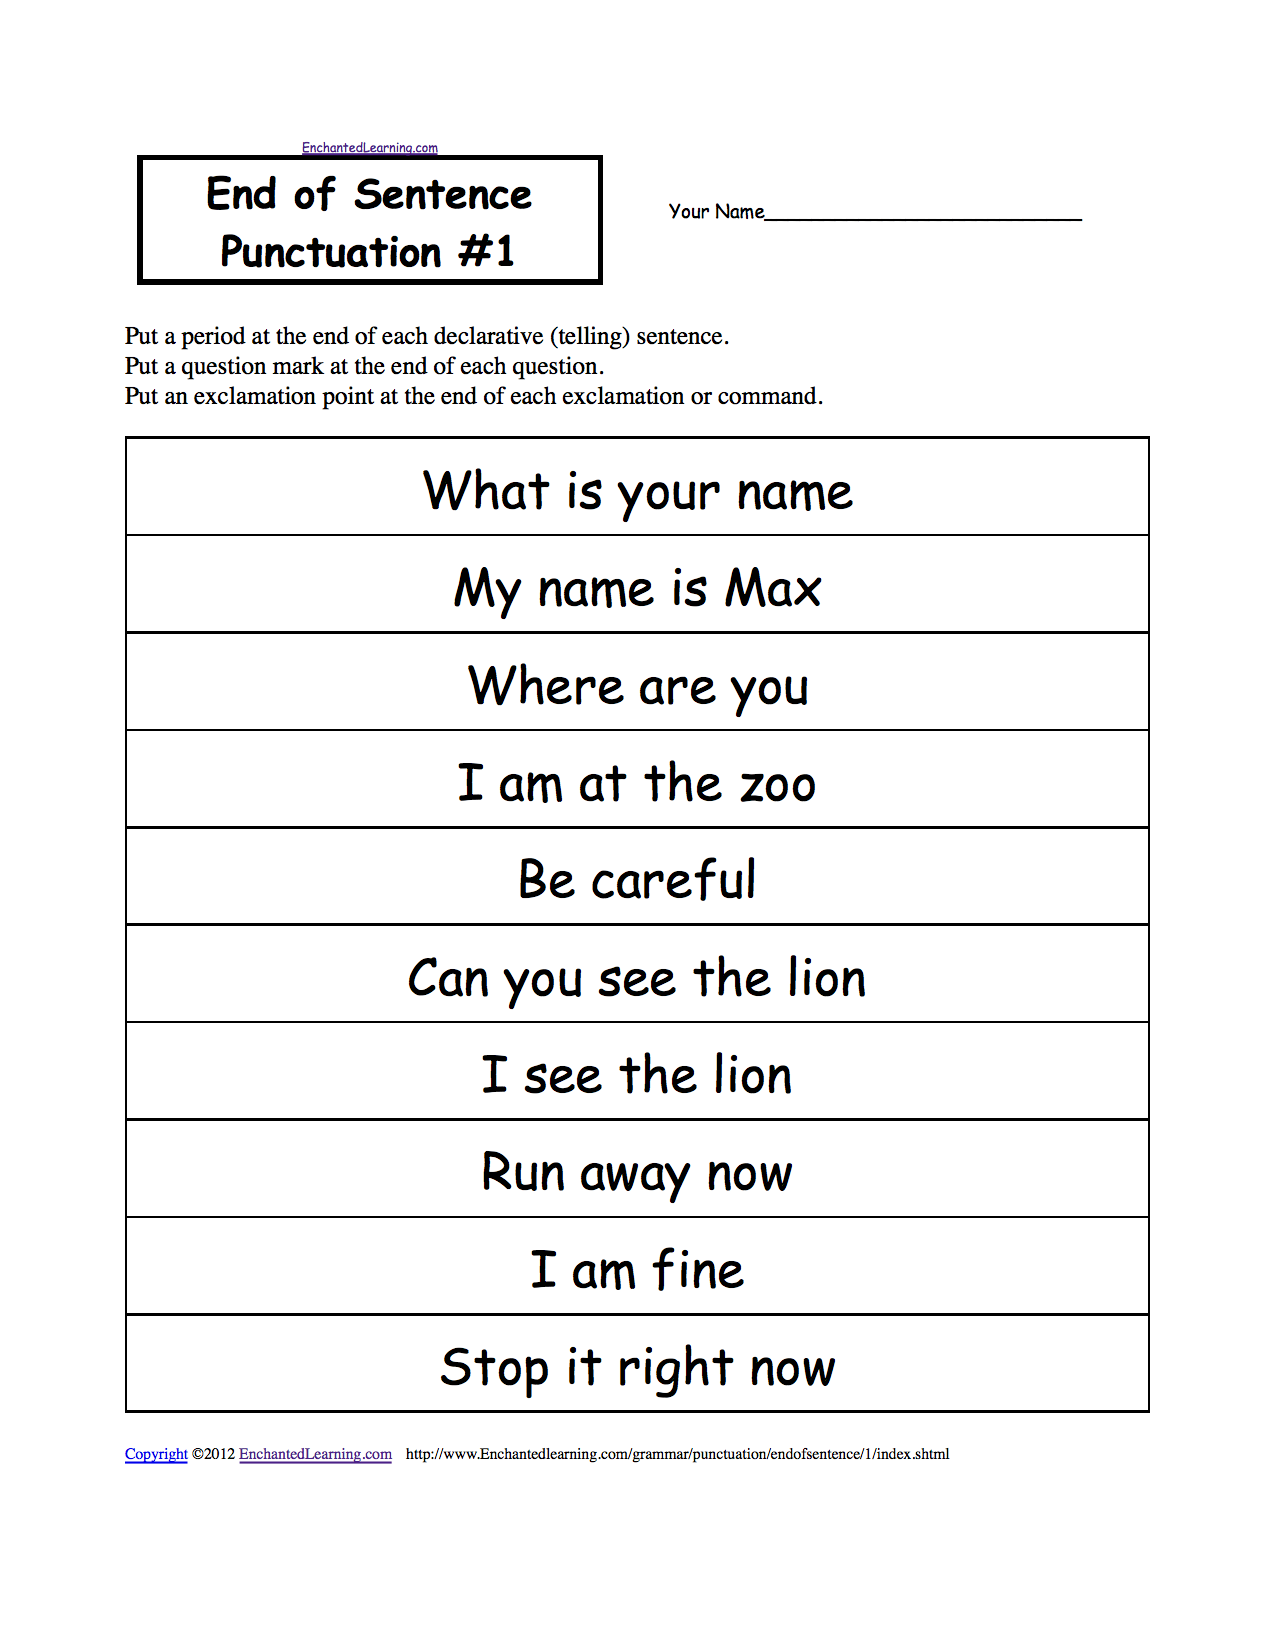 english-punctuation-and-sequence-worksheet-2-grade-2-estudynotes